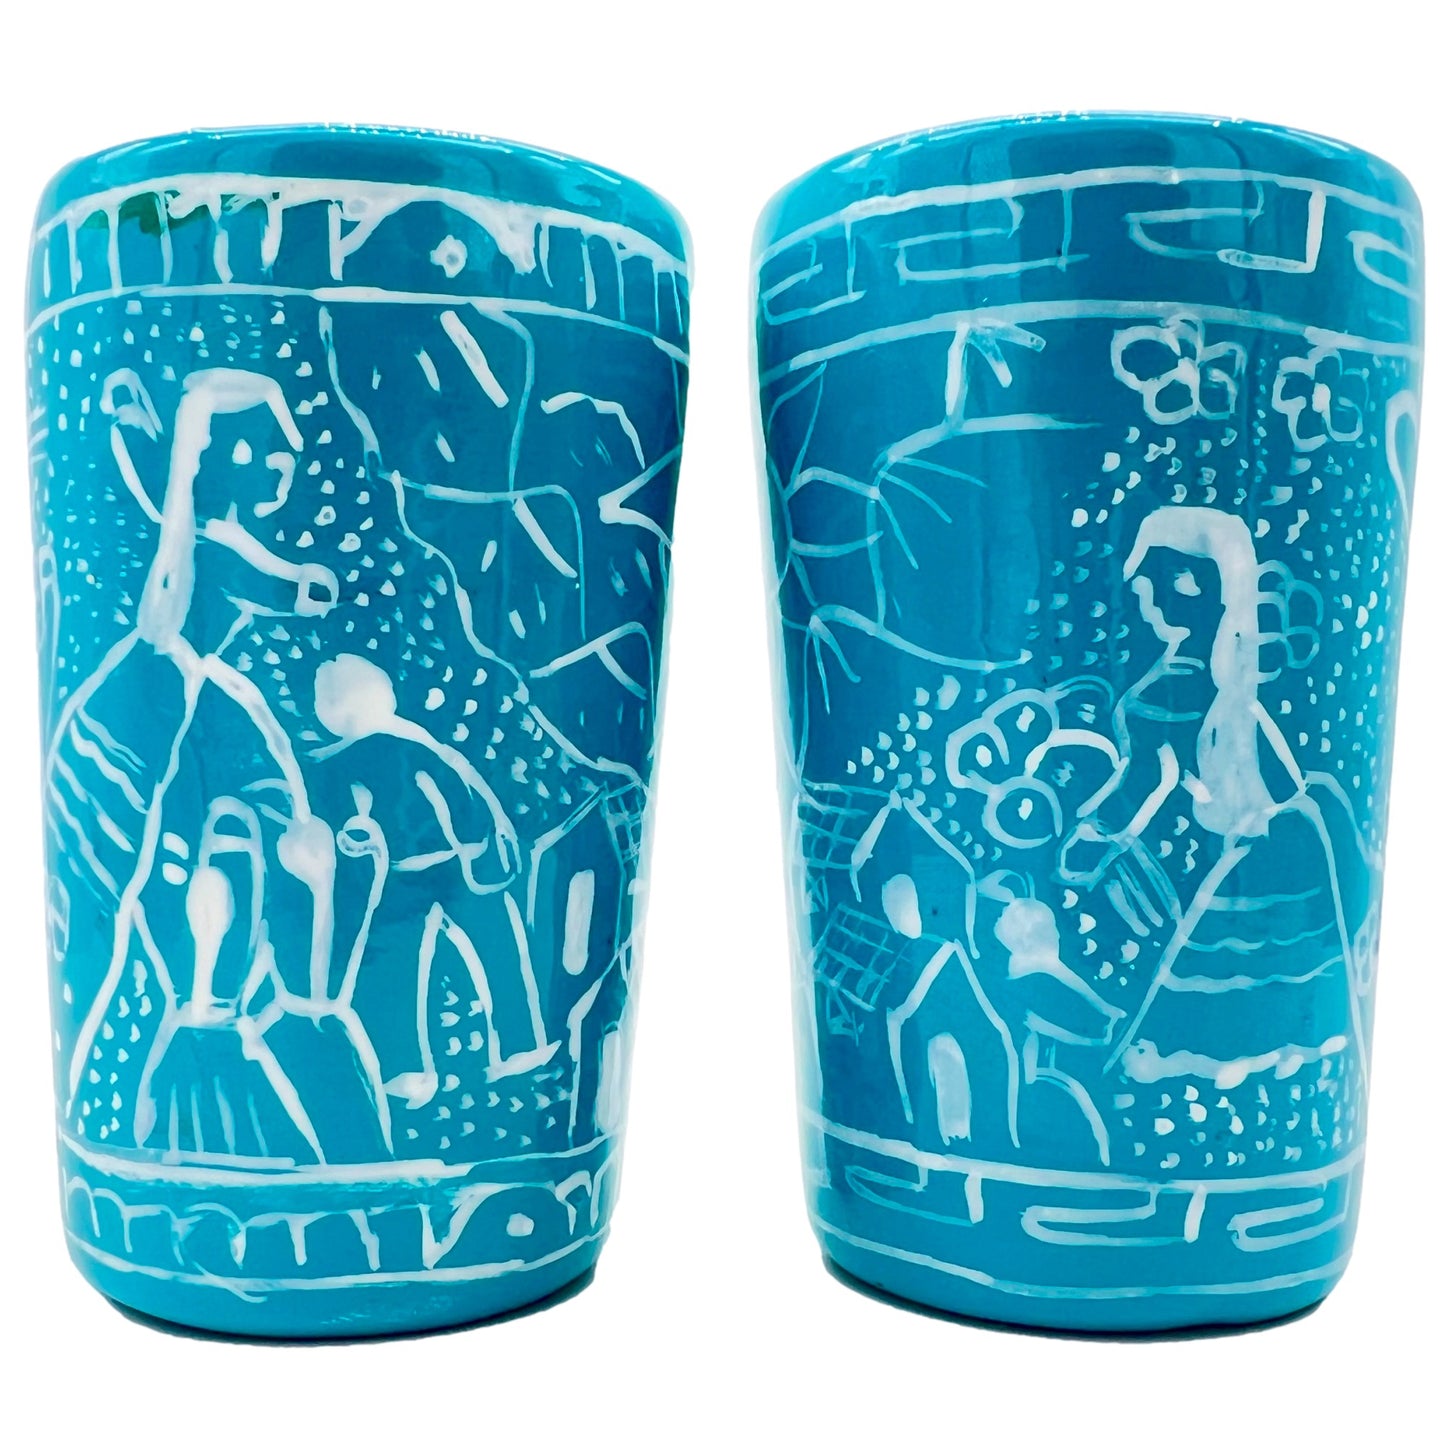 Turquoise ceramic shot glasses, individually hand-painted in Mexico, perfect for tequila, mezcal, or other spirits, pack of 2.